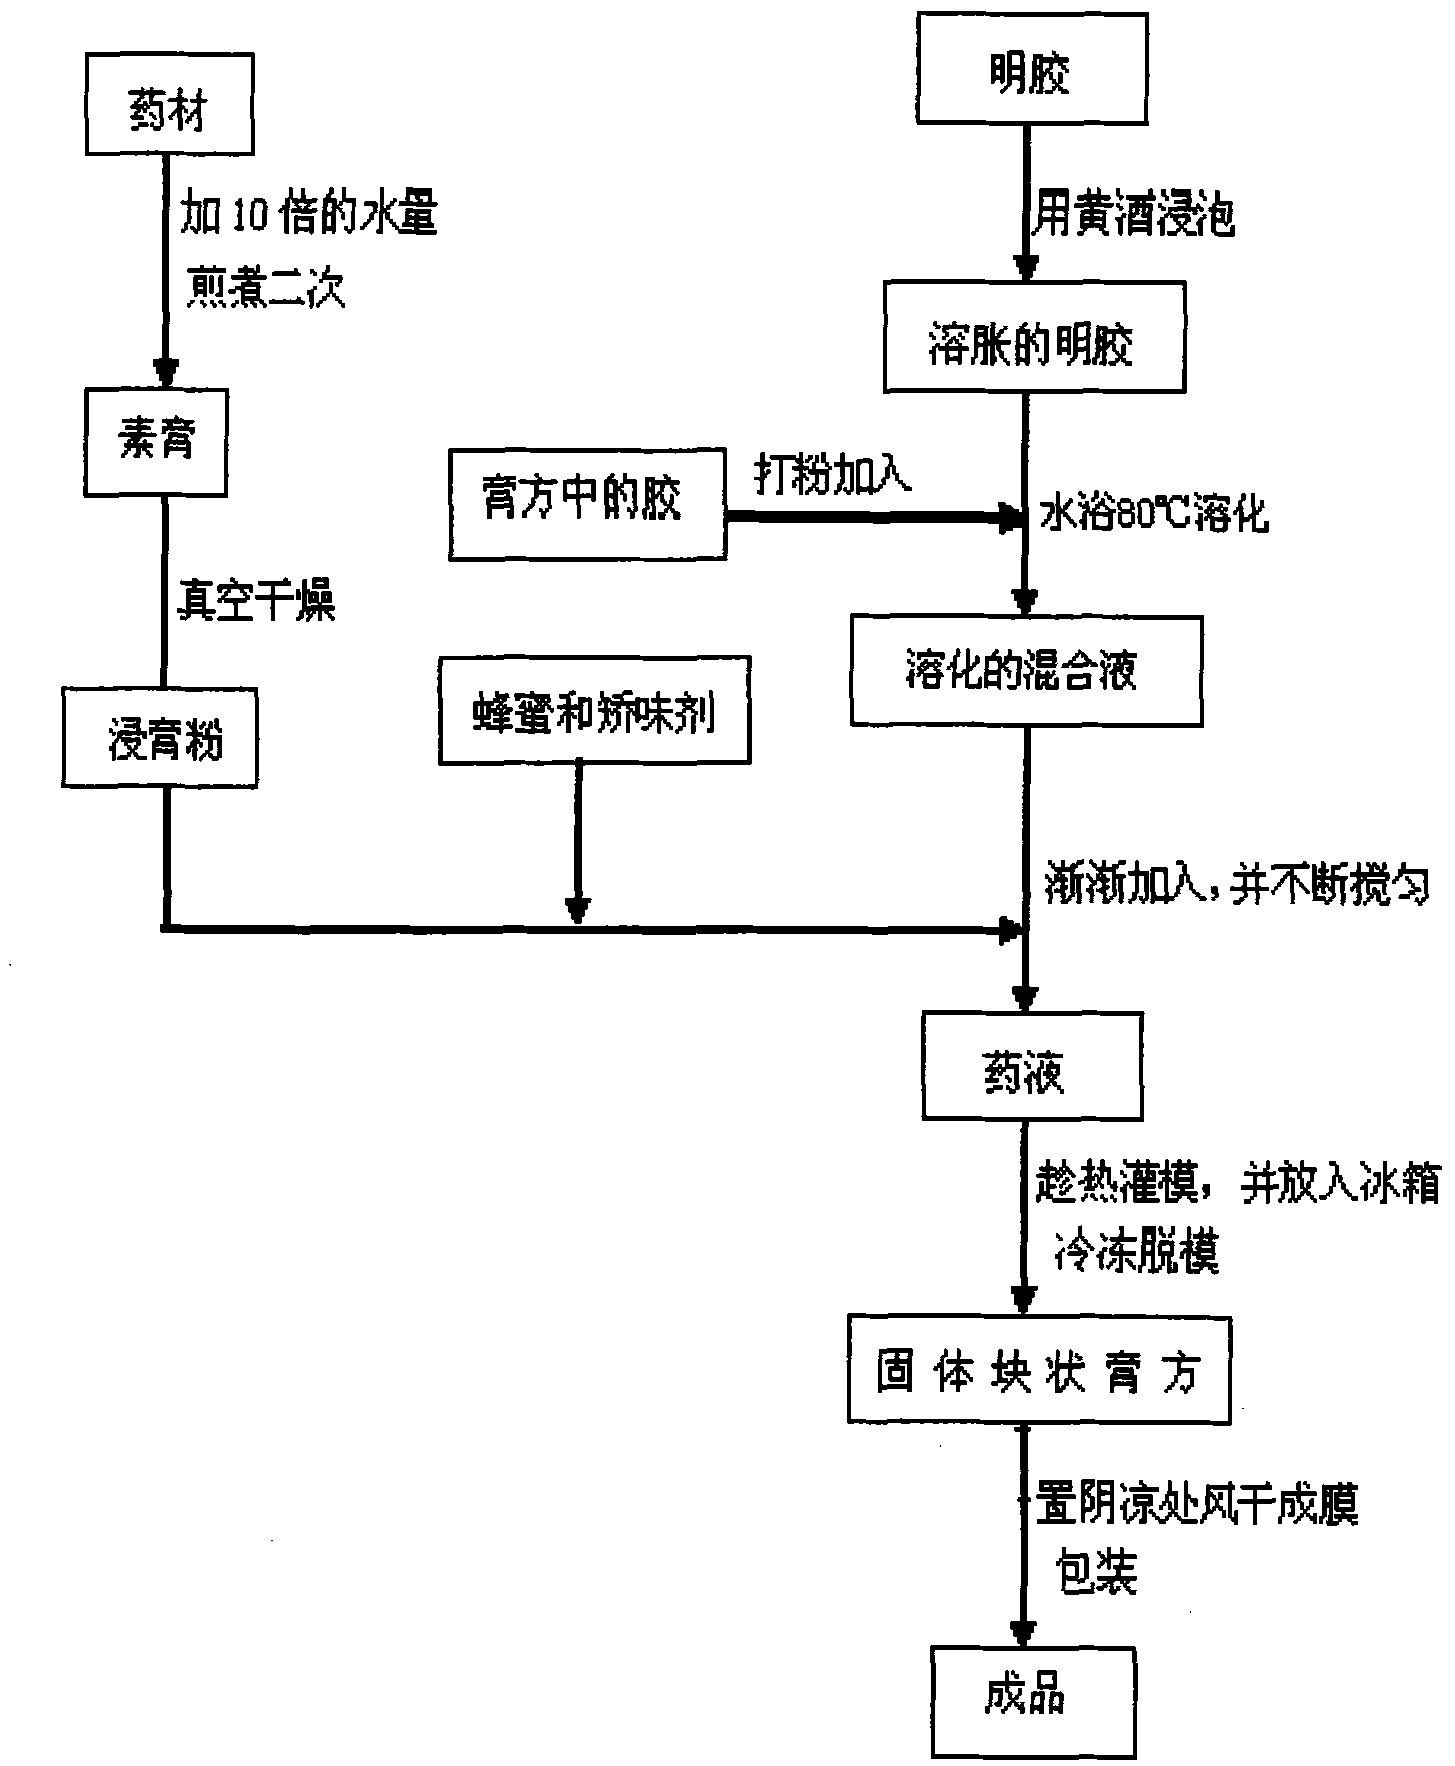 Method for solidifying traditional Chinese ointment